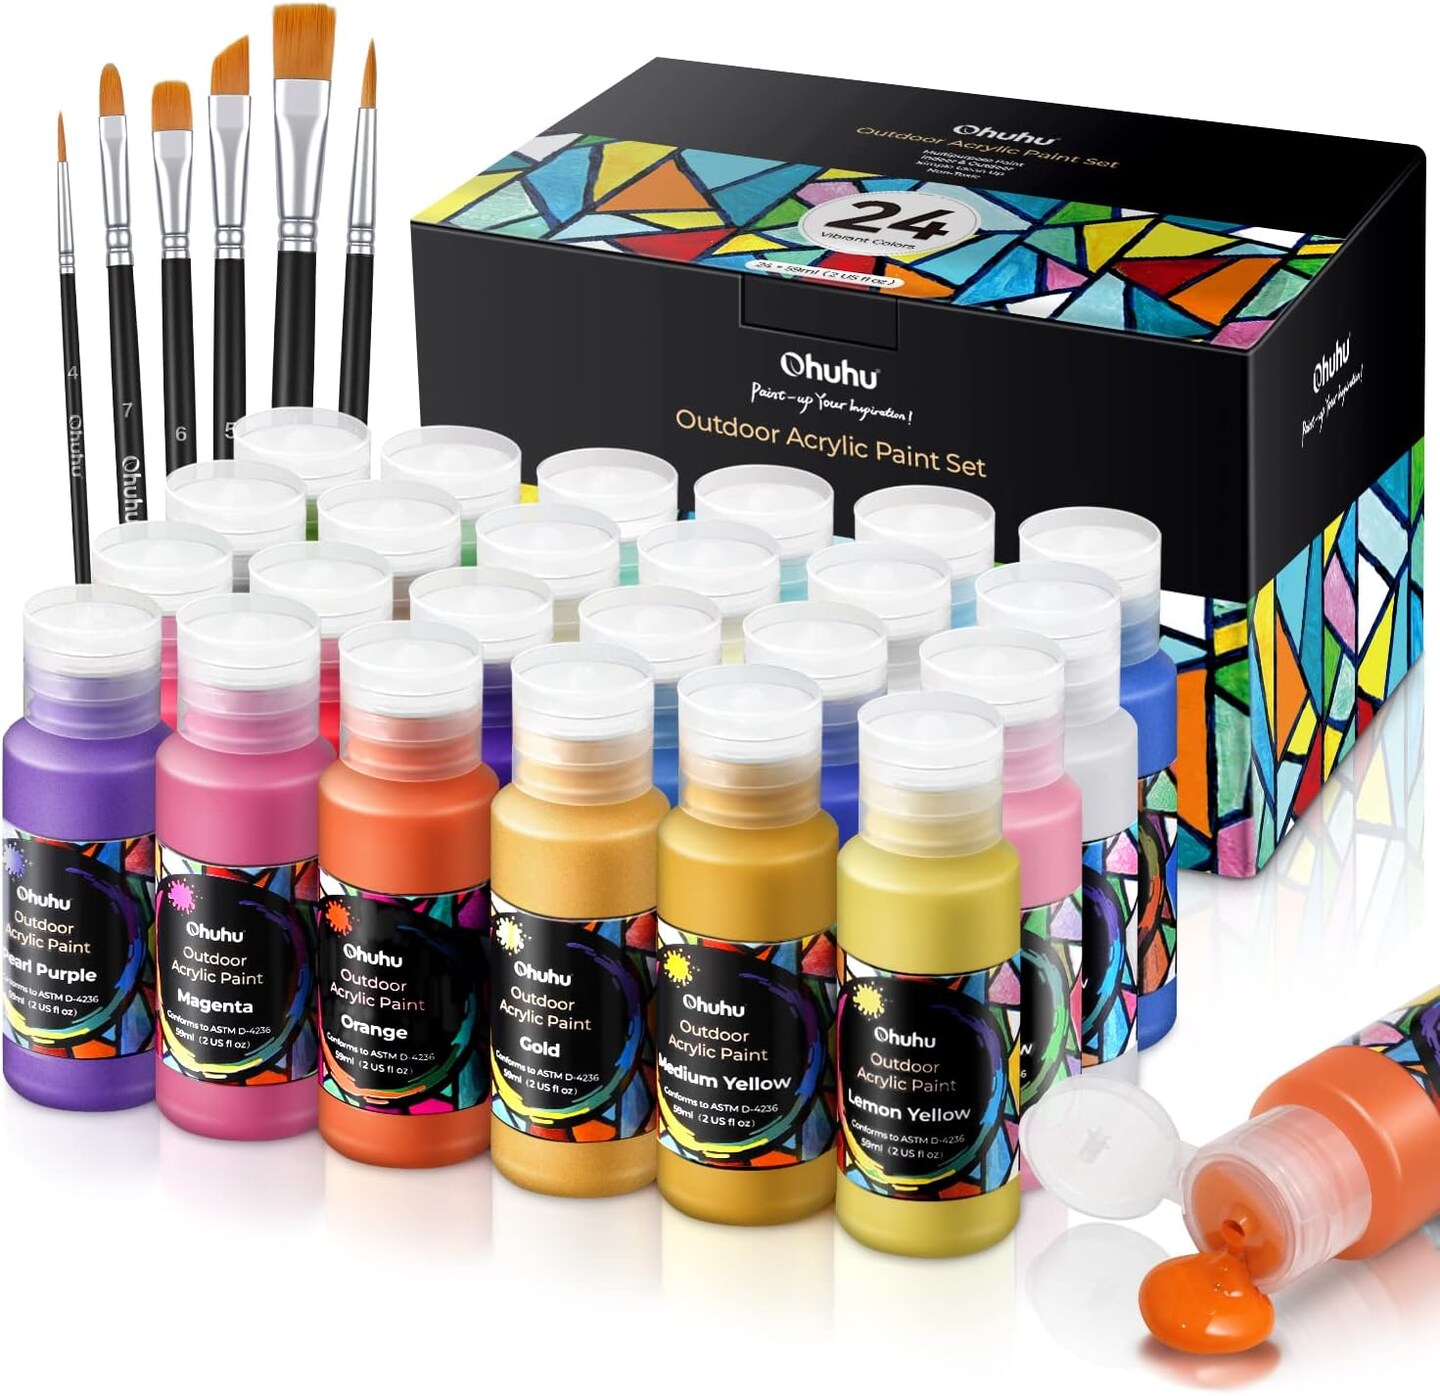 Outdoor Acrylic Paint for Metal, Ohuhu 24 Colors Art Craft Paint Set, 18 Basic Color and 6 Metallic Acrylic Paints (60ml, 2oz.) with 6 Brushes, Waterproof Rich Pigments For Garden Statues, Woods, Rocks, Canvas, Glass, Fabrics, Last 3-4 Years